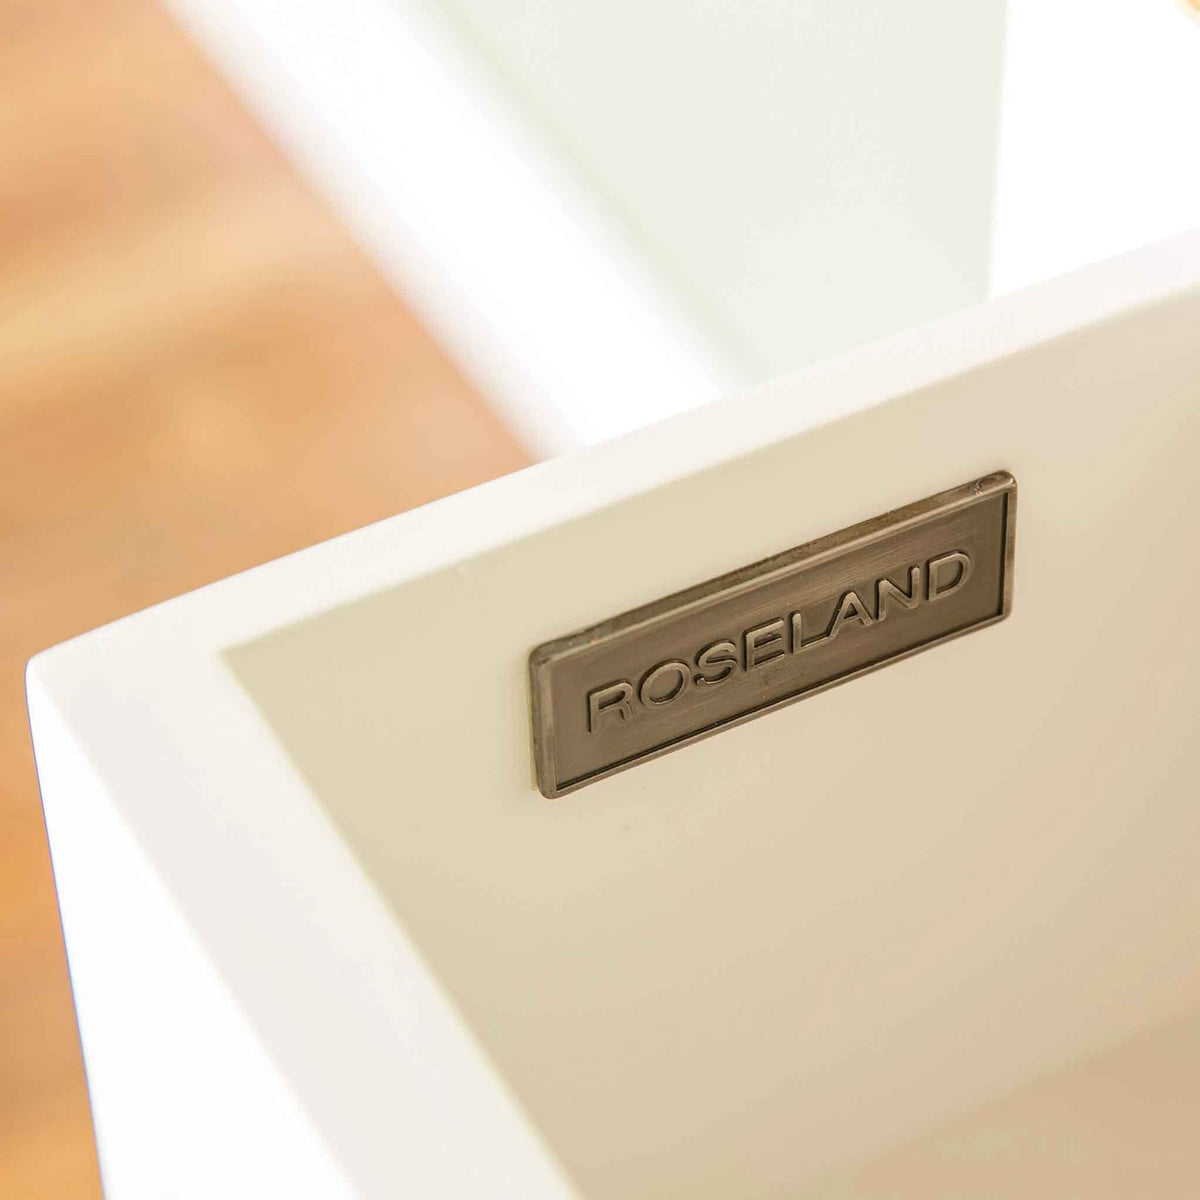 Roseland Furniture logo on The Cornish White Wooden 3 Drawer Bedside Table